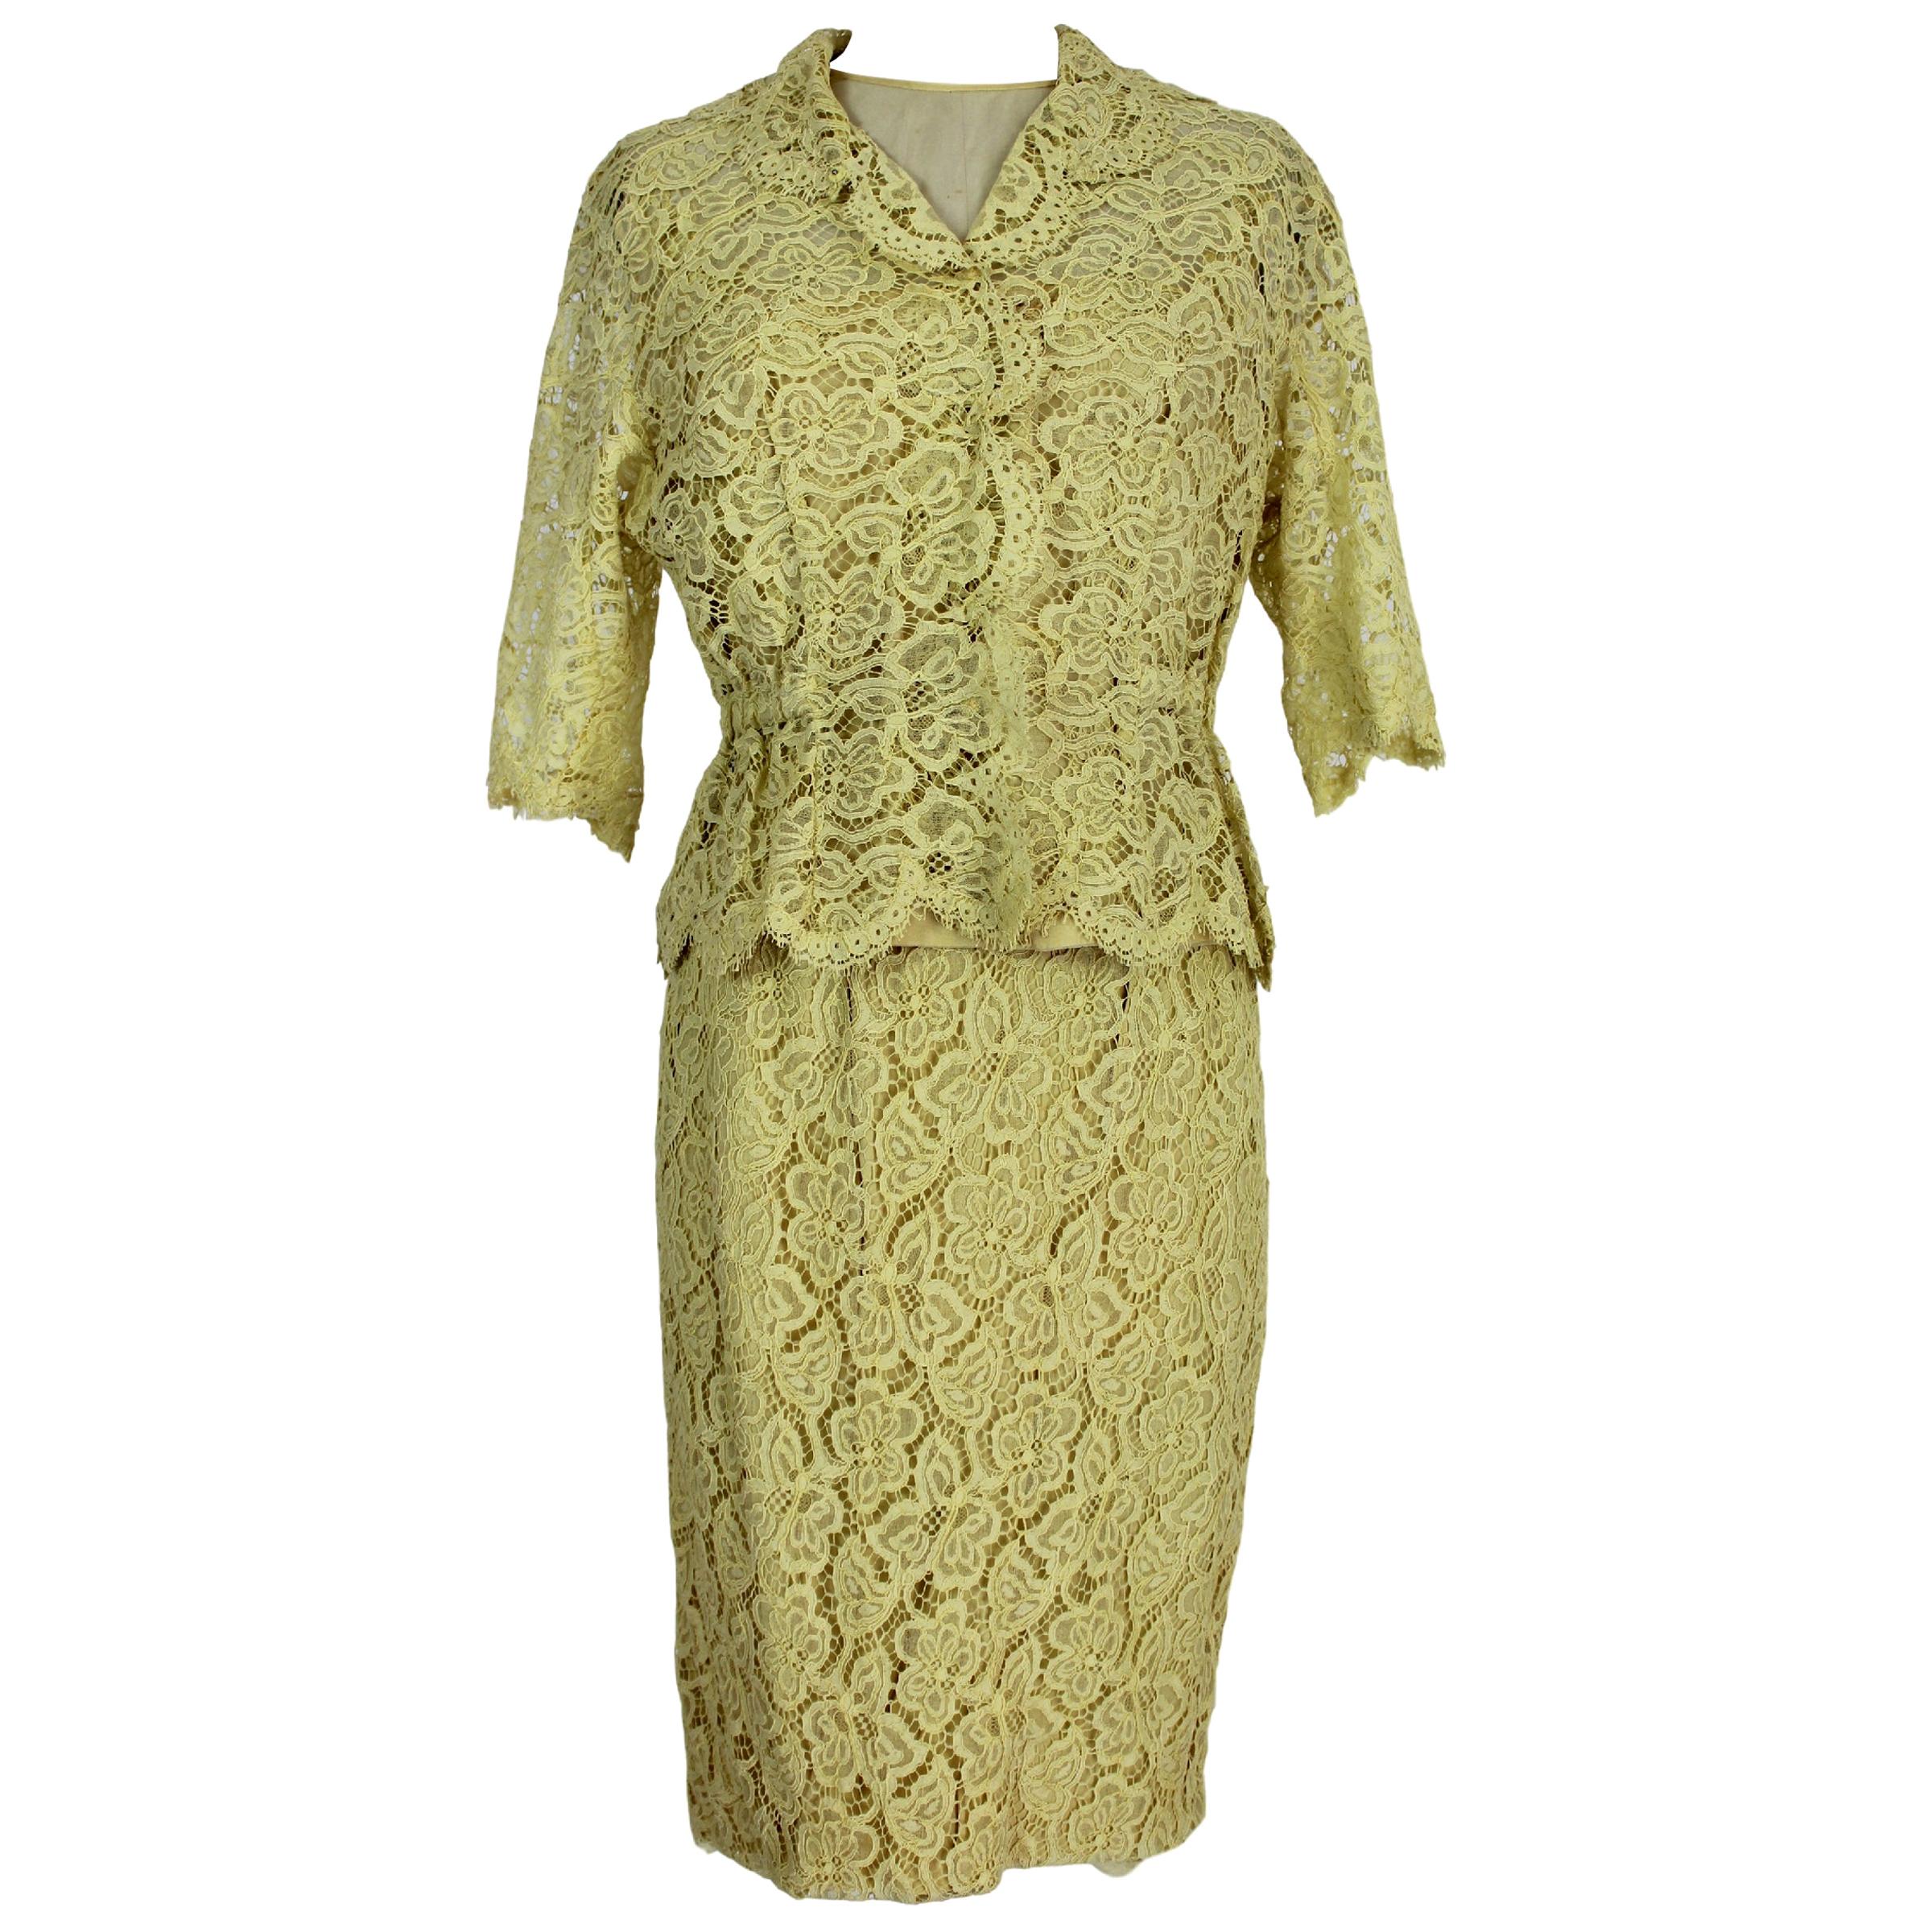 Mignon Yellow Silk Lace Museum Dress Suit Skirt and Jacket 1960s